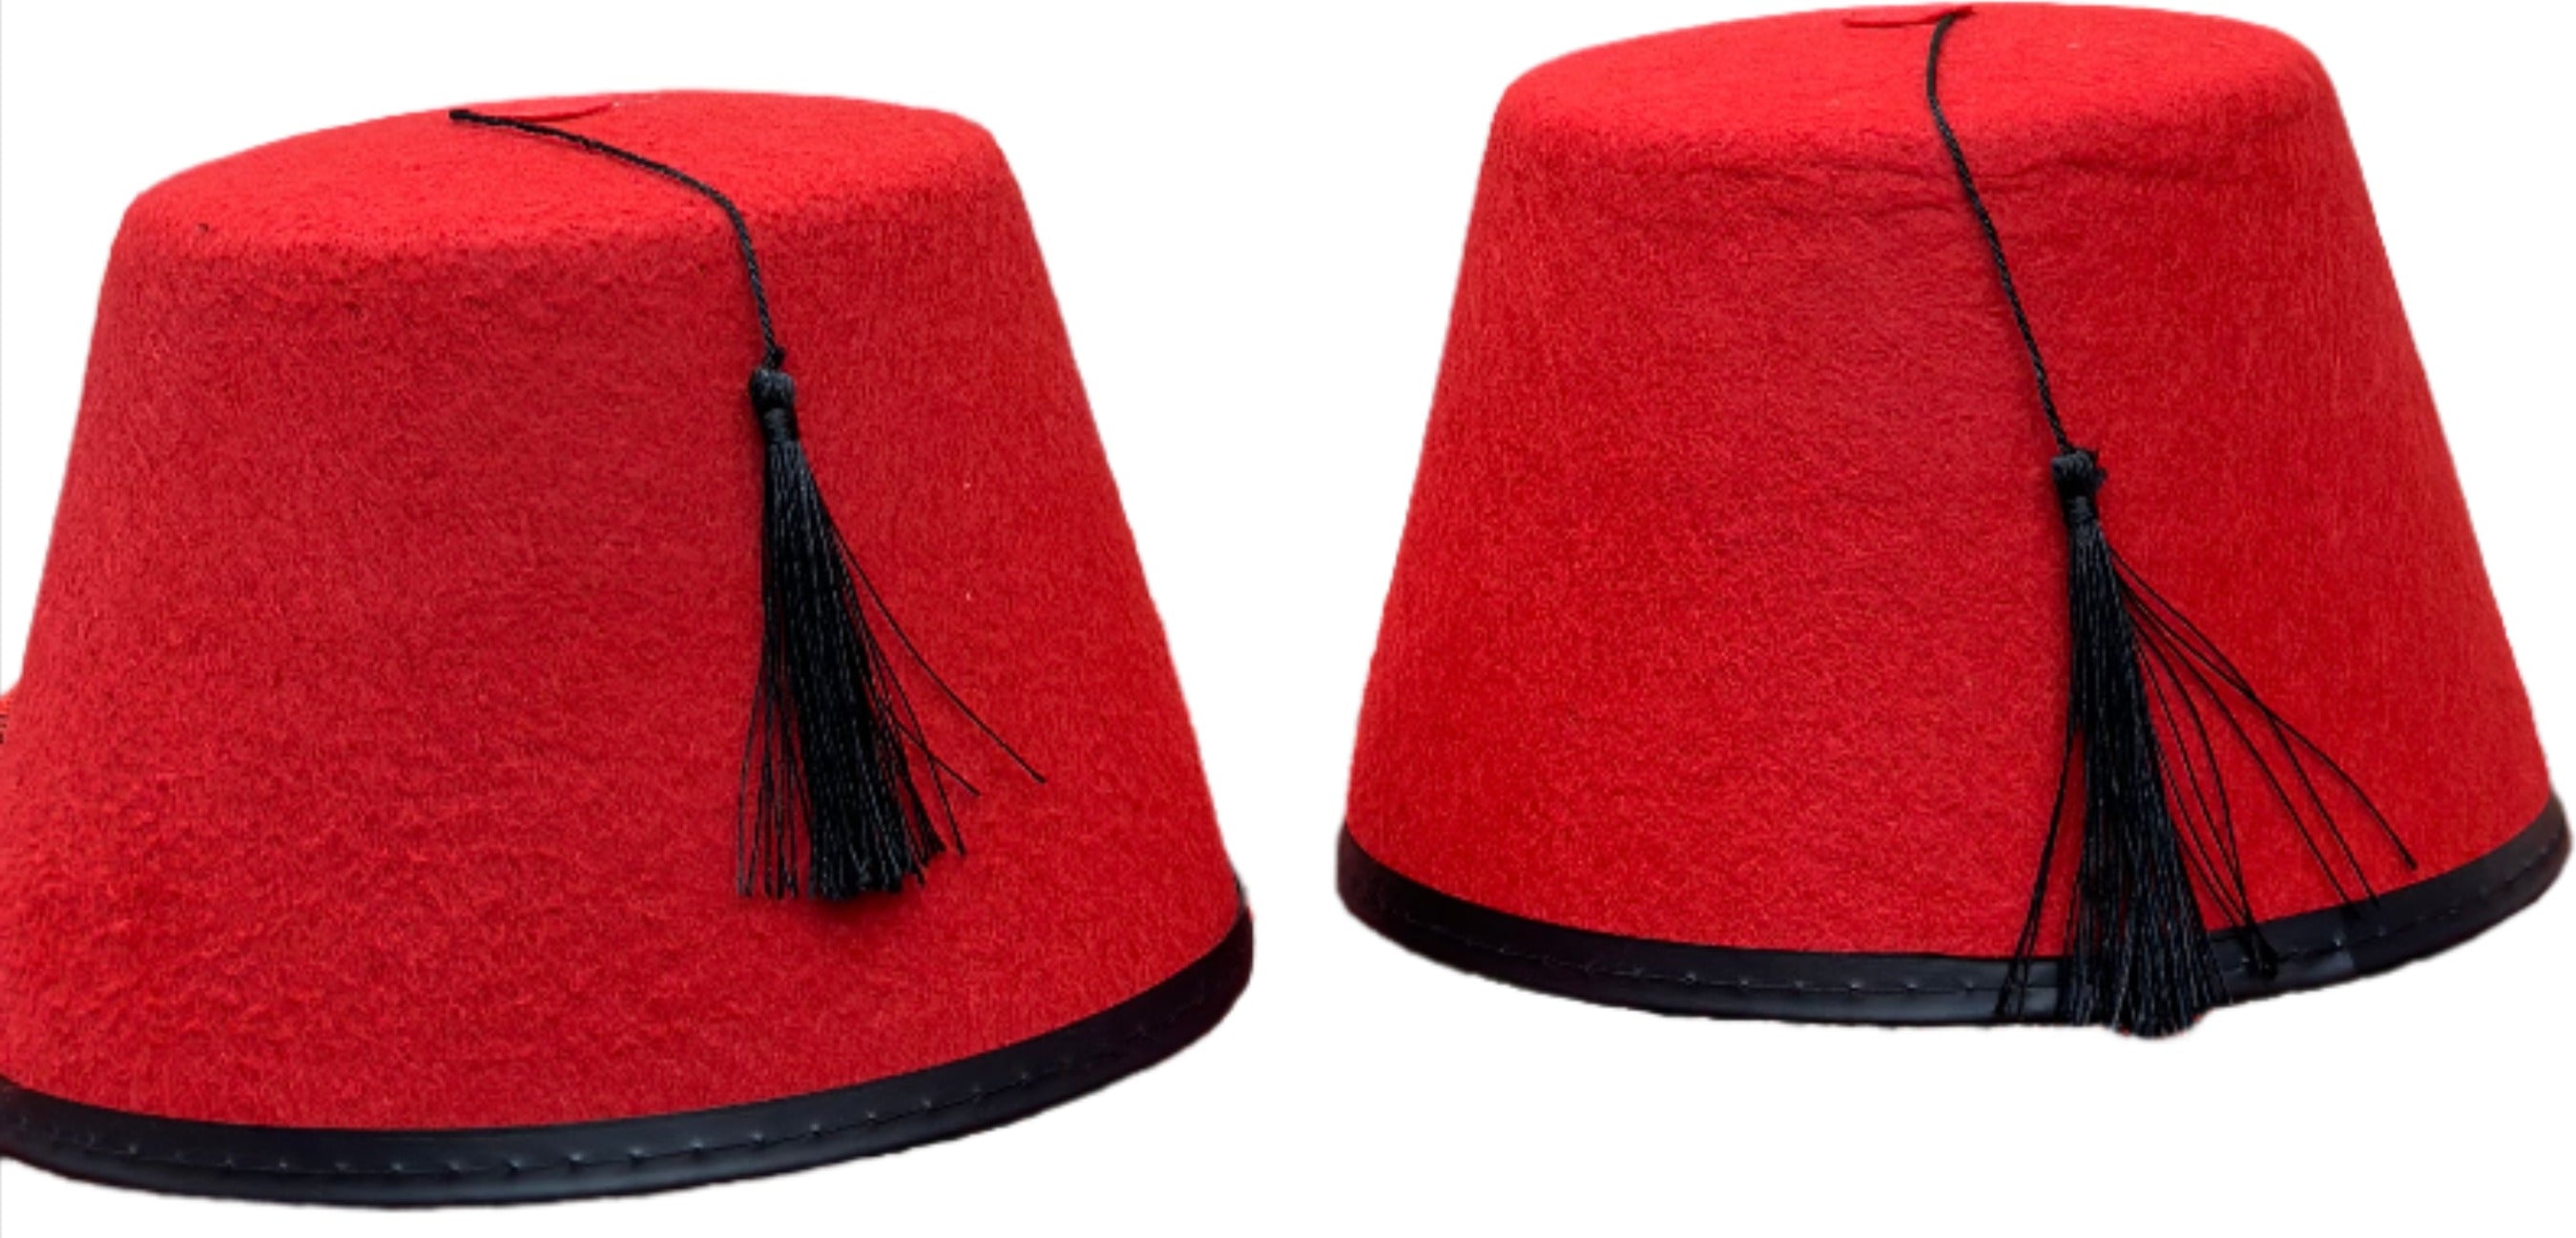 Tarboosh Sidi: The Ultimate Hat for Any Occasion